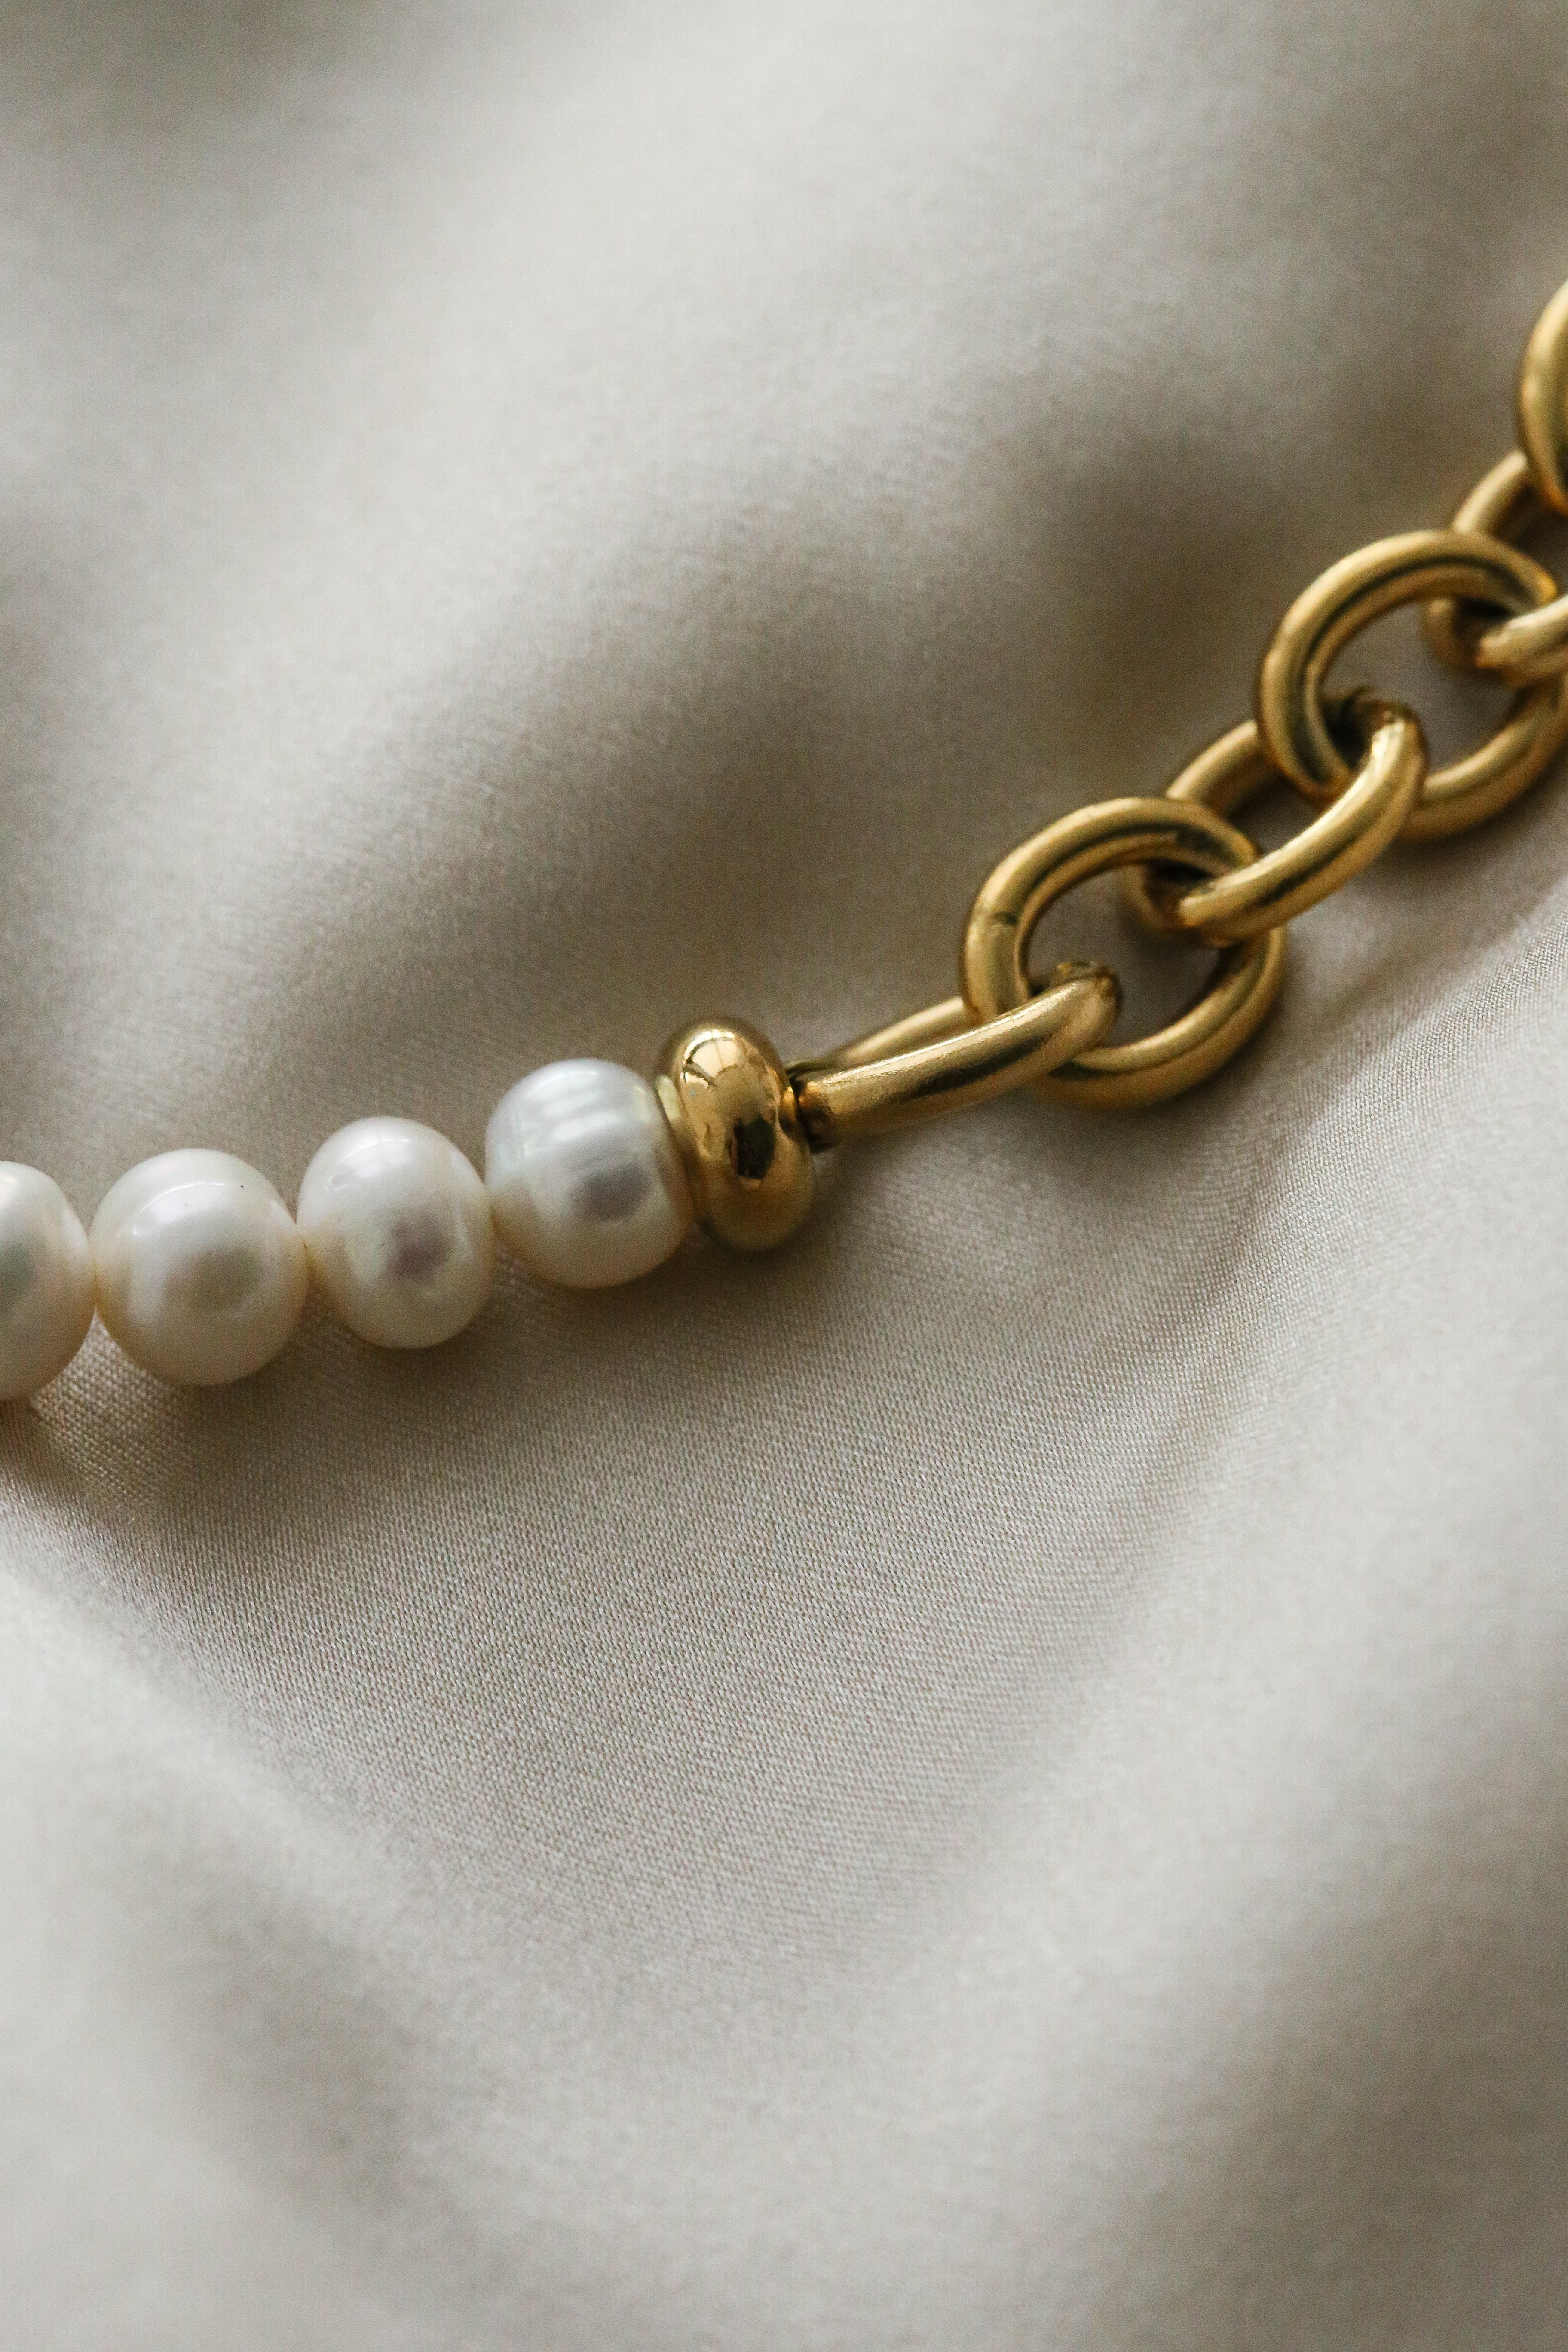 Valerie Necklace - Boutique Minimaliste has waterproof, durable, elegant and vintage inspired jewelry